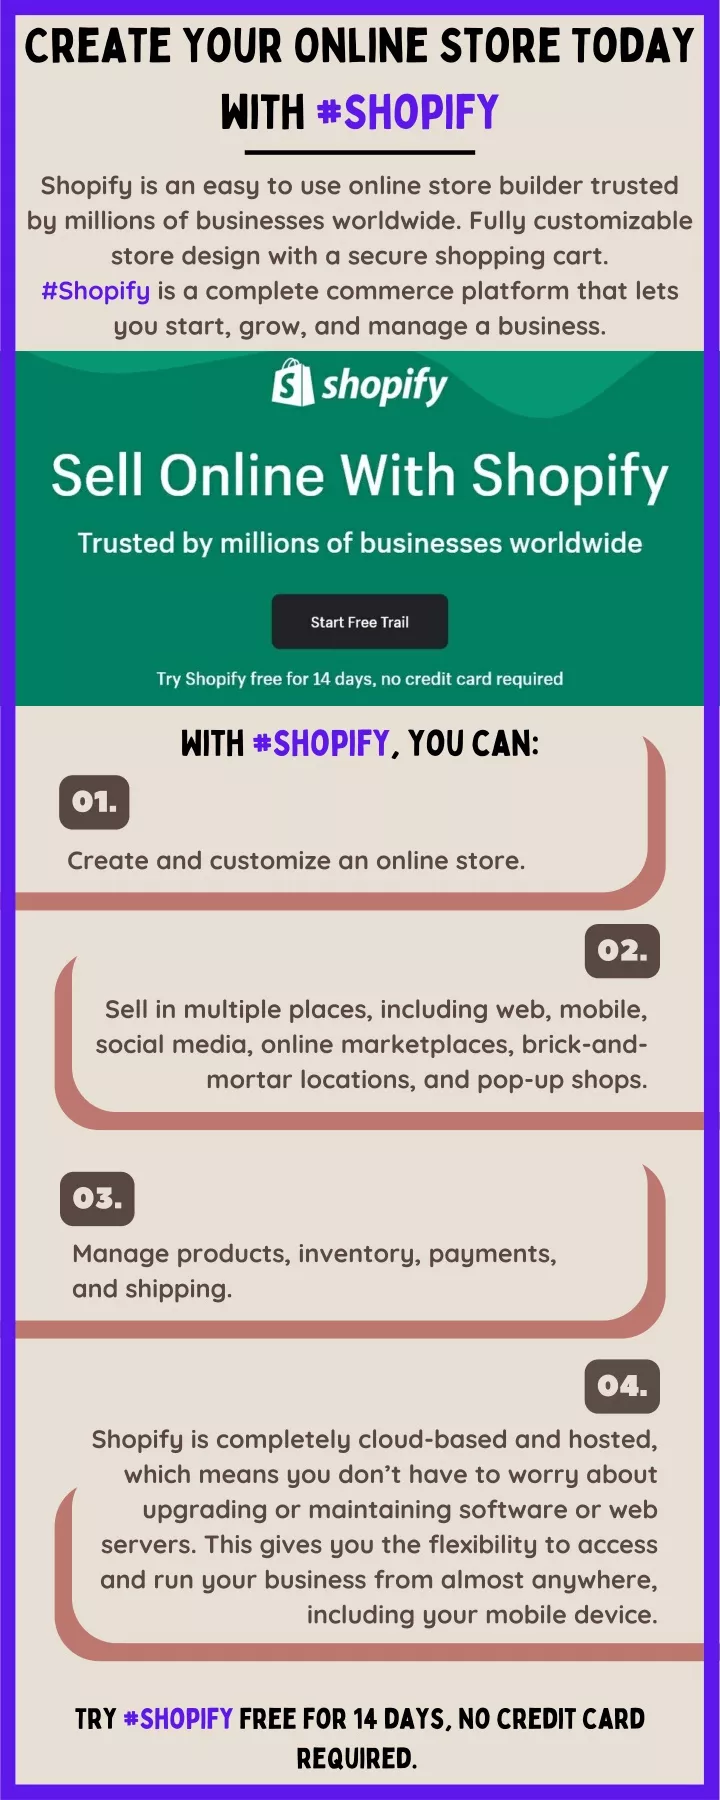 create your online store today with shopify